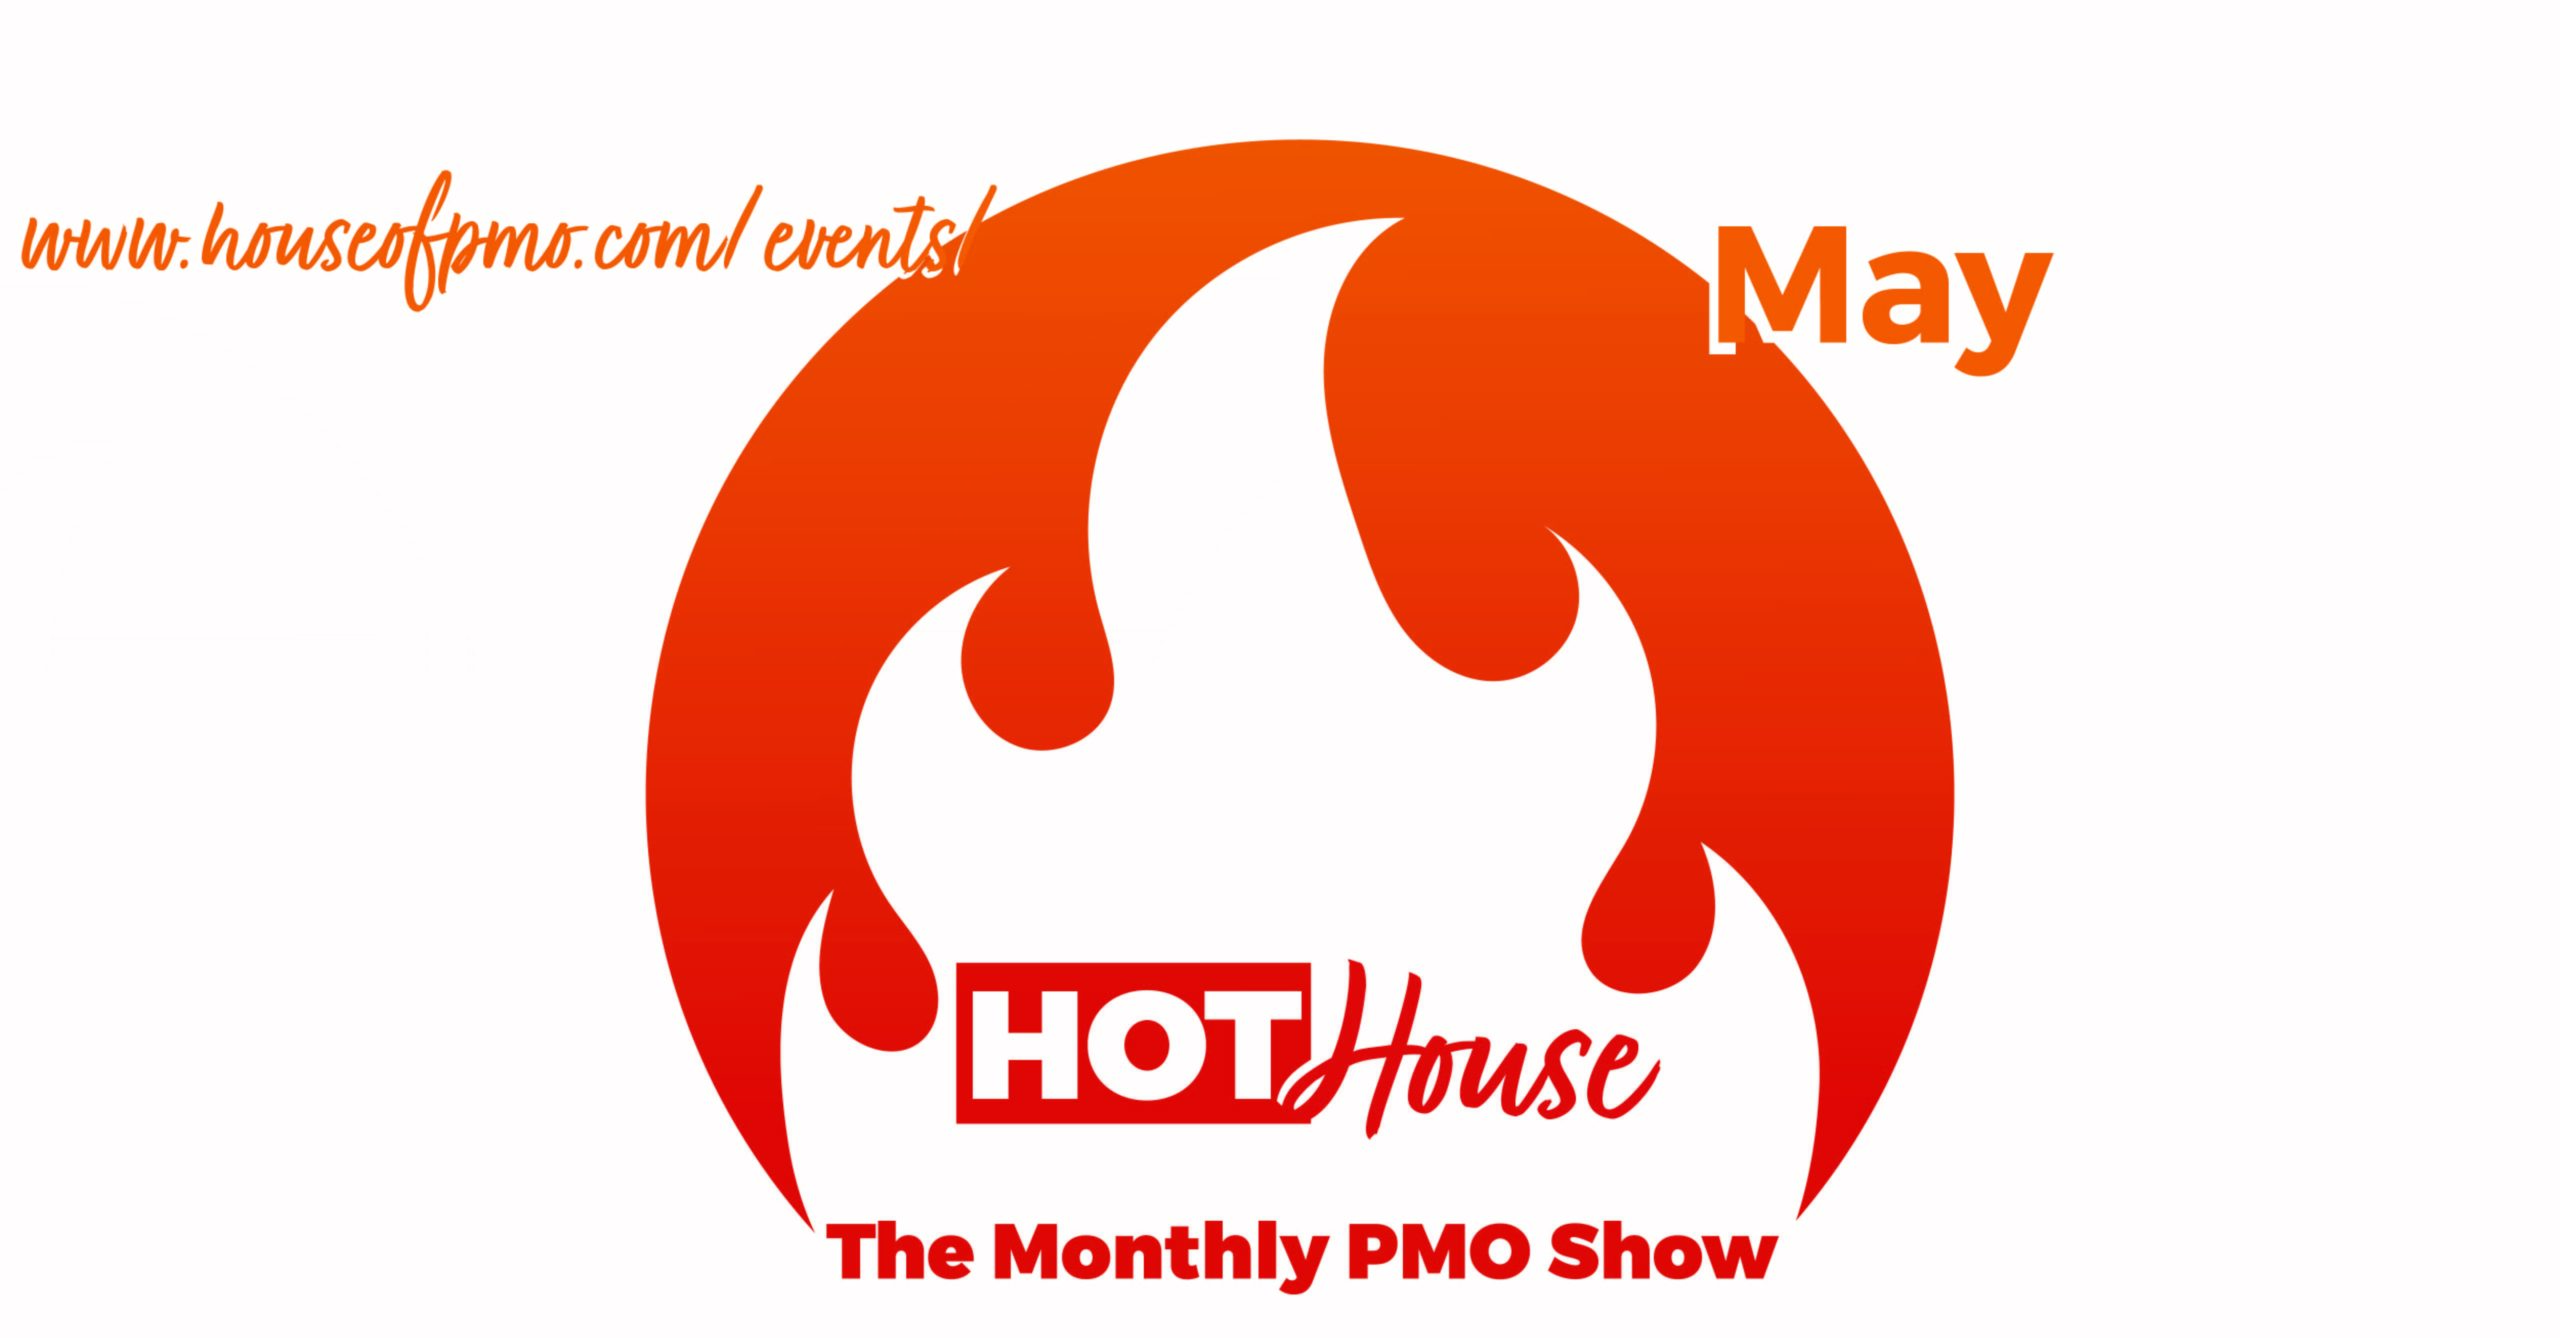 Image for the event pmo hot house in may